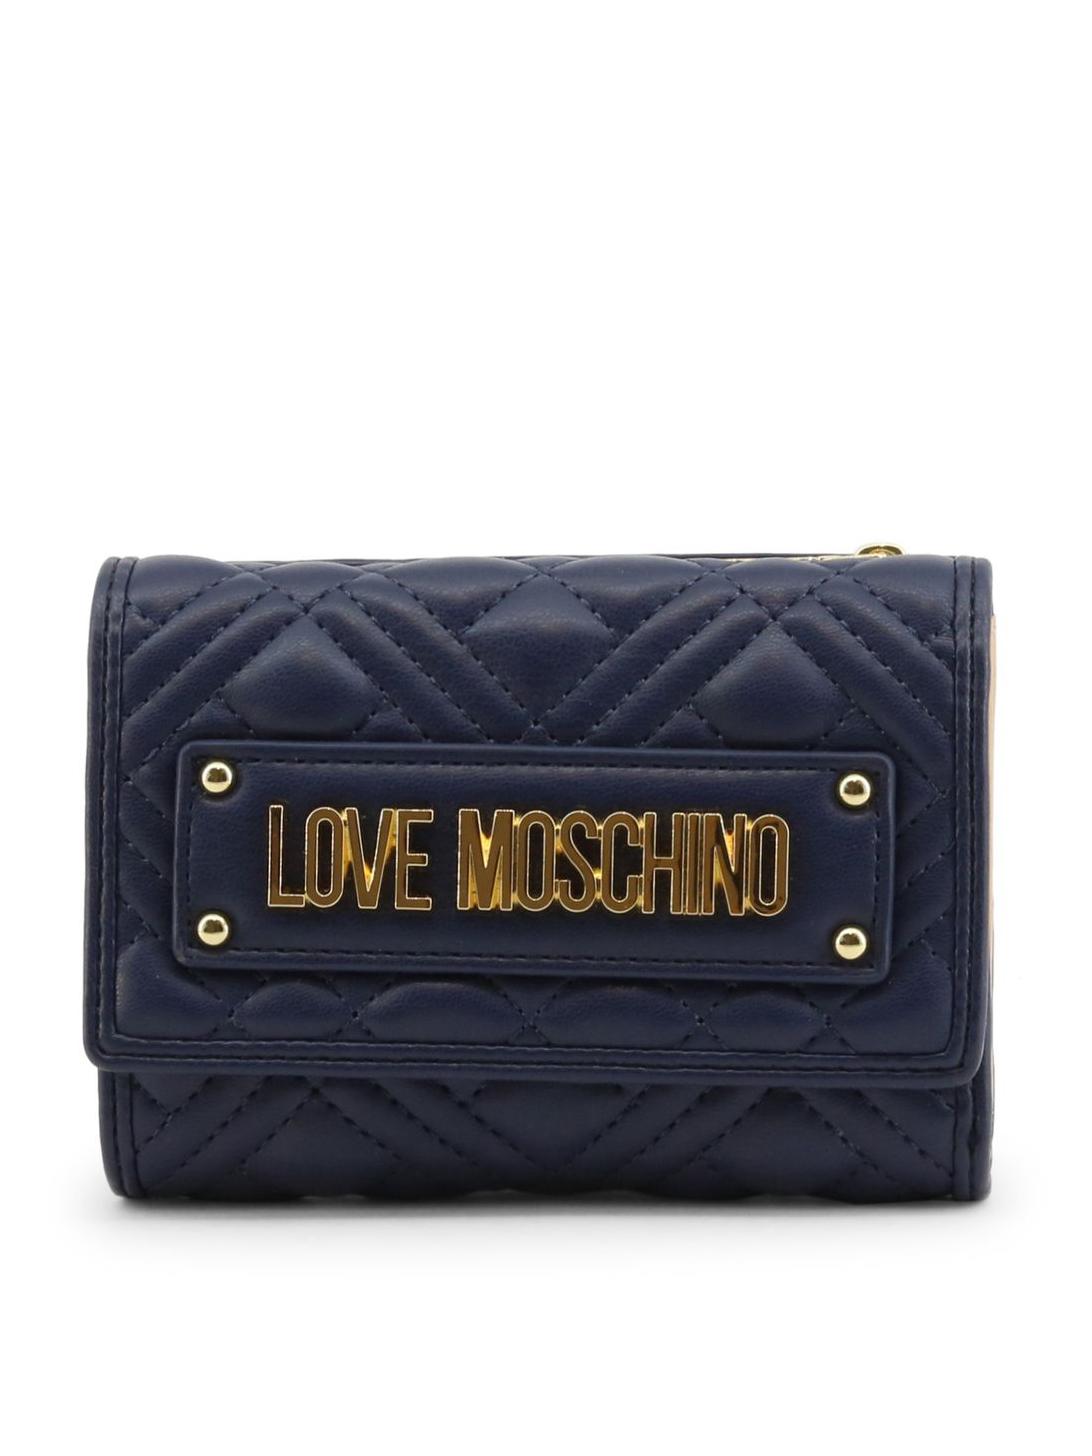 Love Moschino Quilted Cartera Mediana - A Precios Outlet!